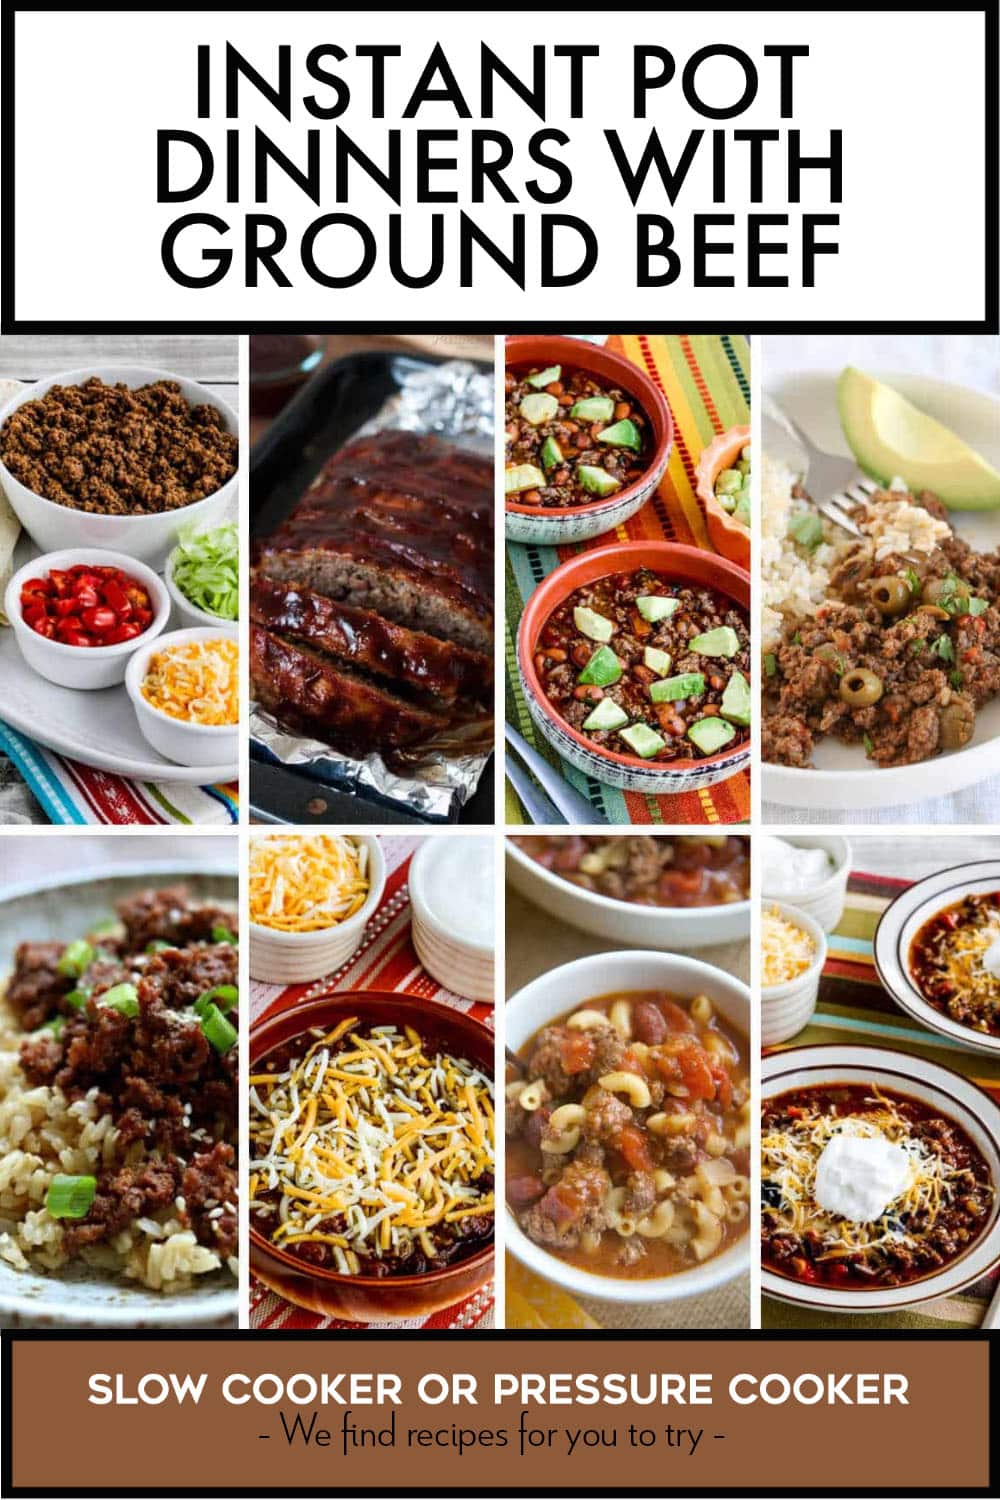 Pinterest image of Instant Pot Dinners with Ground Beef